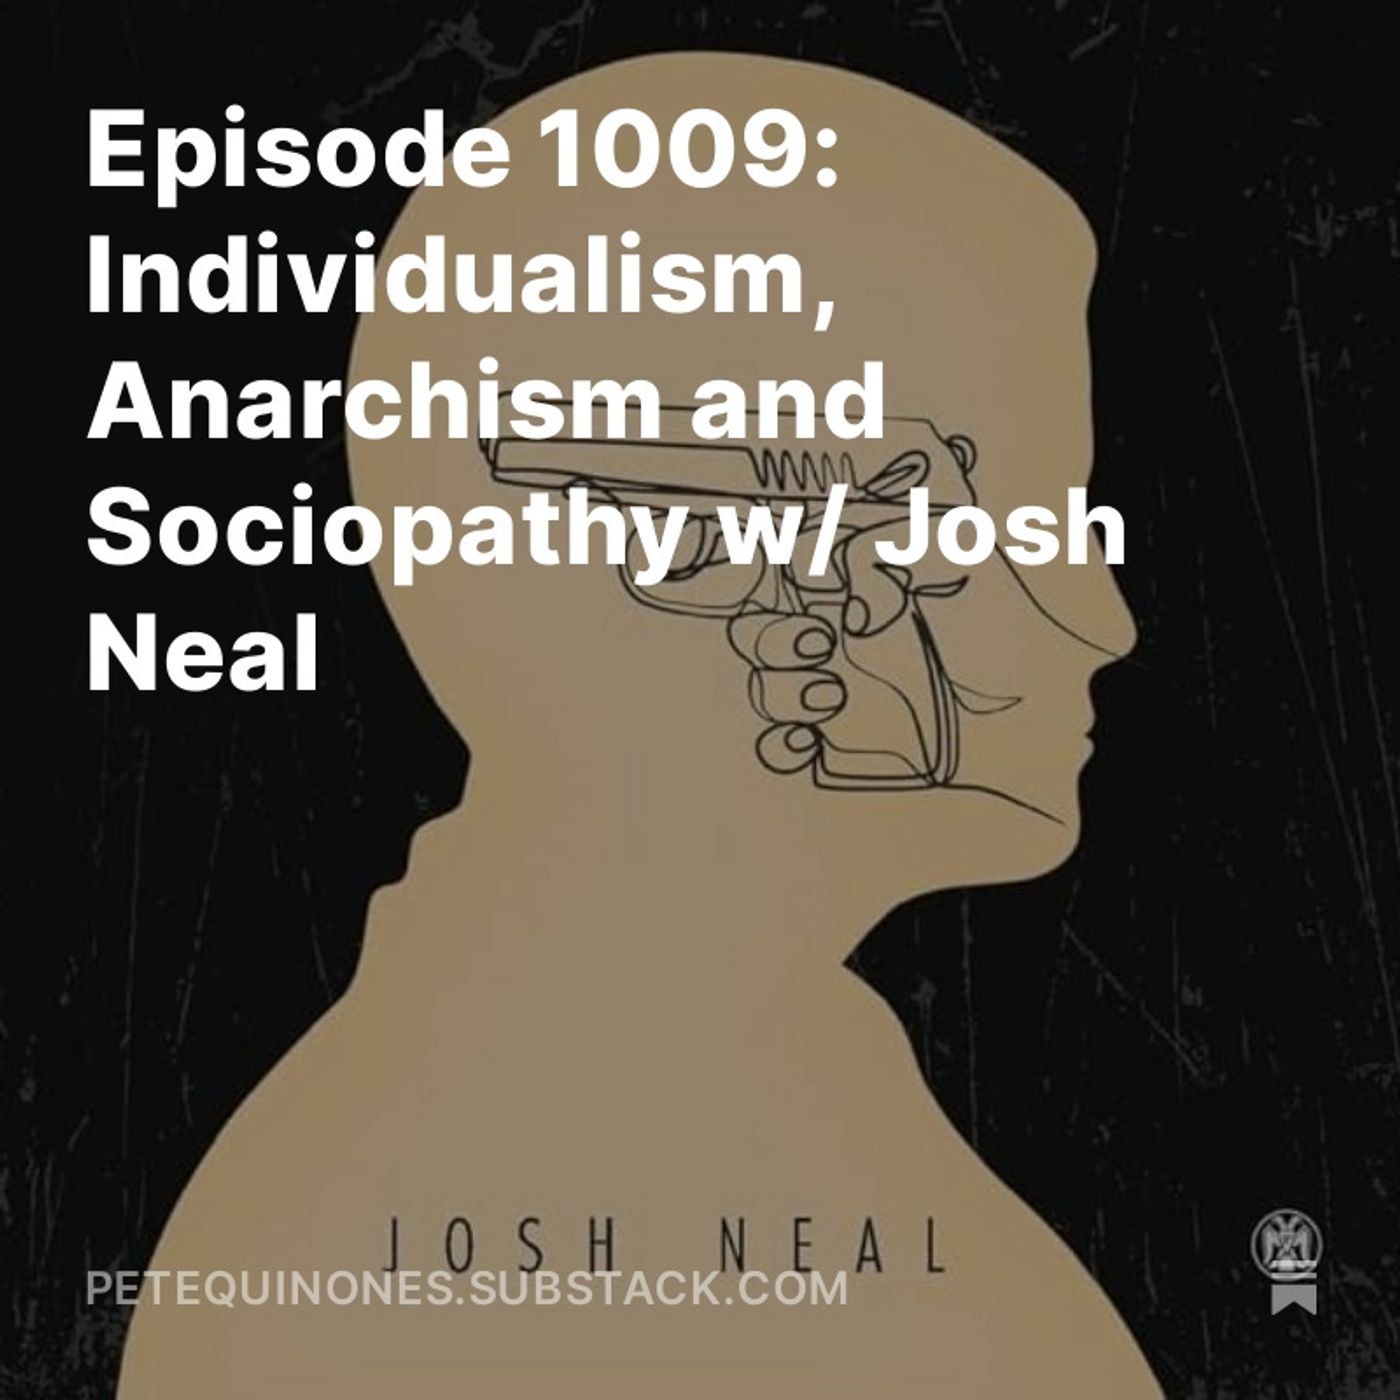 Episode 1009: Individualism, Anarchism and Sociopathy w/ Josh Neal